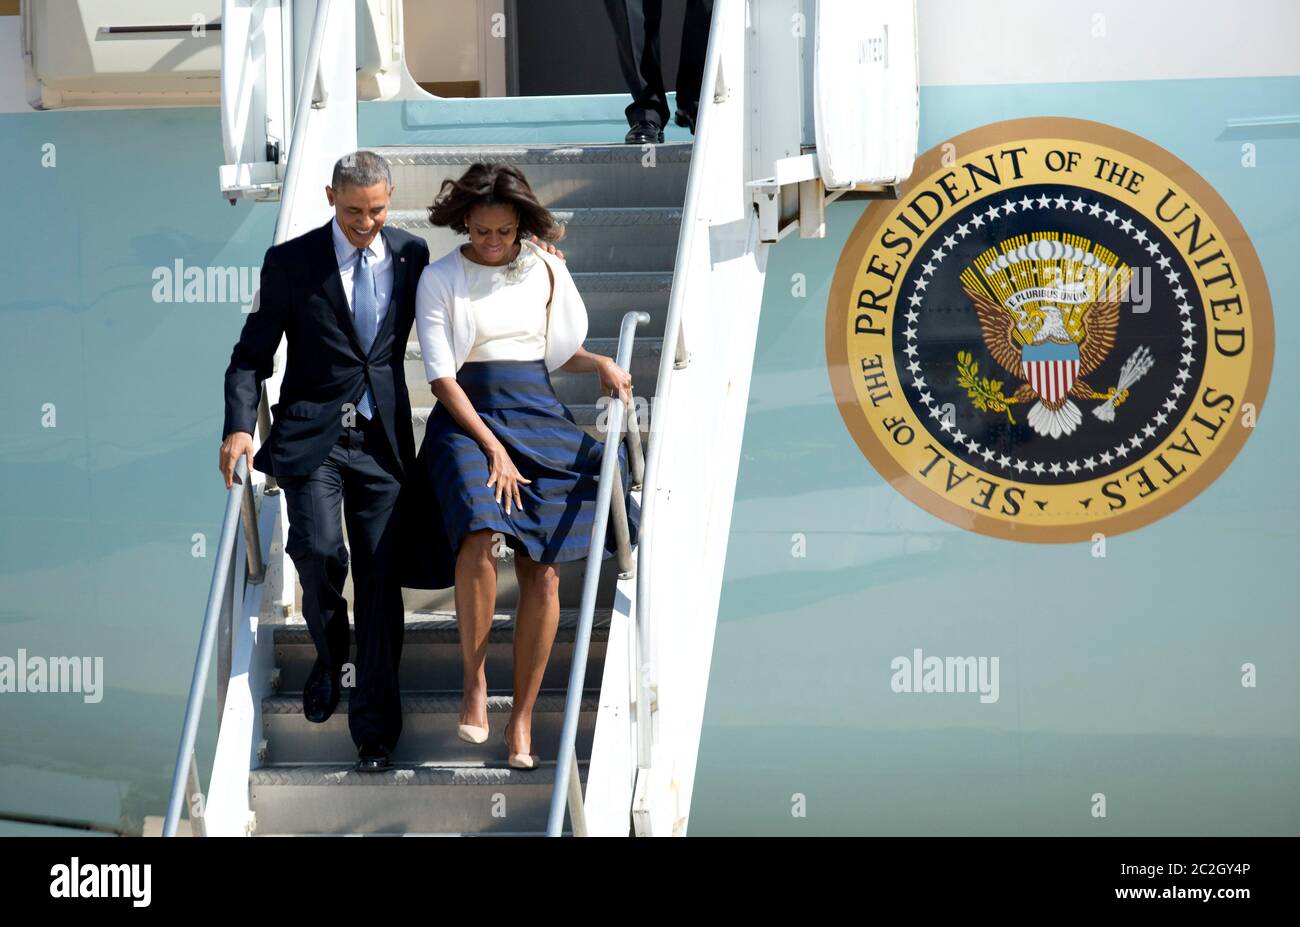 Austin Texas USA, April 10 2014: President Barack Obama and First Lady Michelle Obama arrive on Air Force One at a windy Austin airport for an appearance at the LBJ Civil Rights Summit at the LBJ Library. Obama is one of four living presidents invited to speak at the conference.   ©Bob Daemmrich Stock Photo